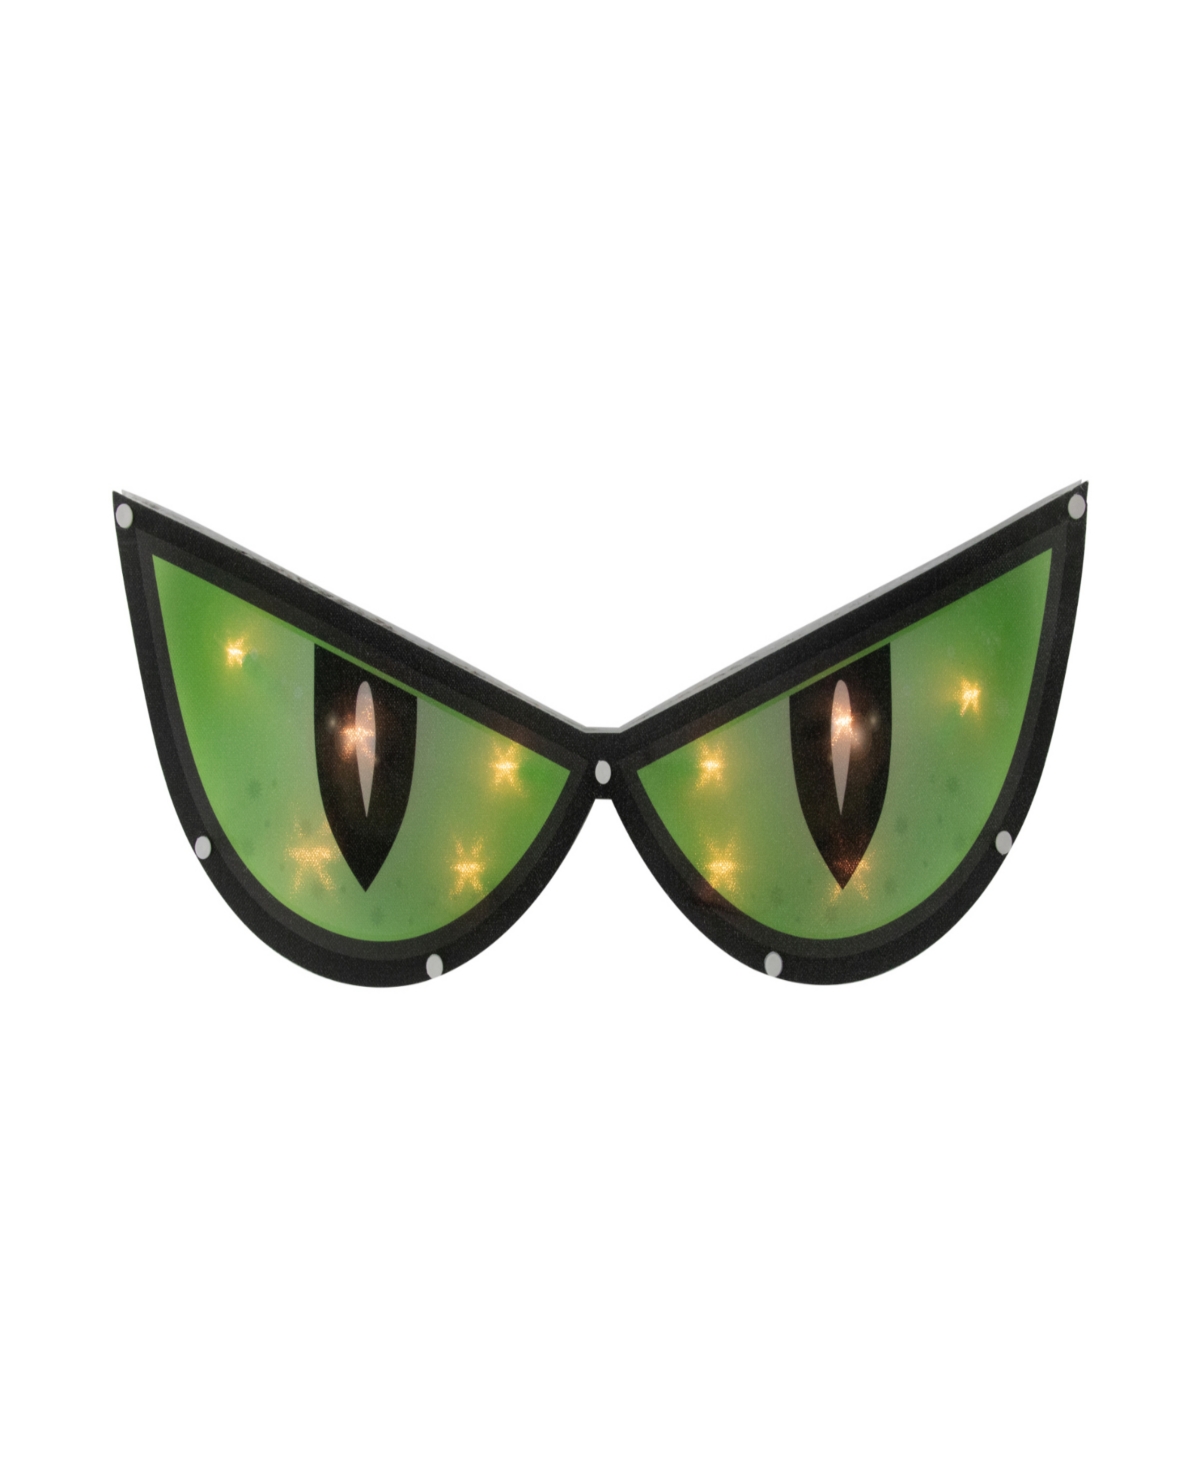 Northlight 20" Lighted Eyes Halloween Window Silhouette Decoration In Green